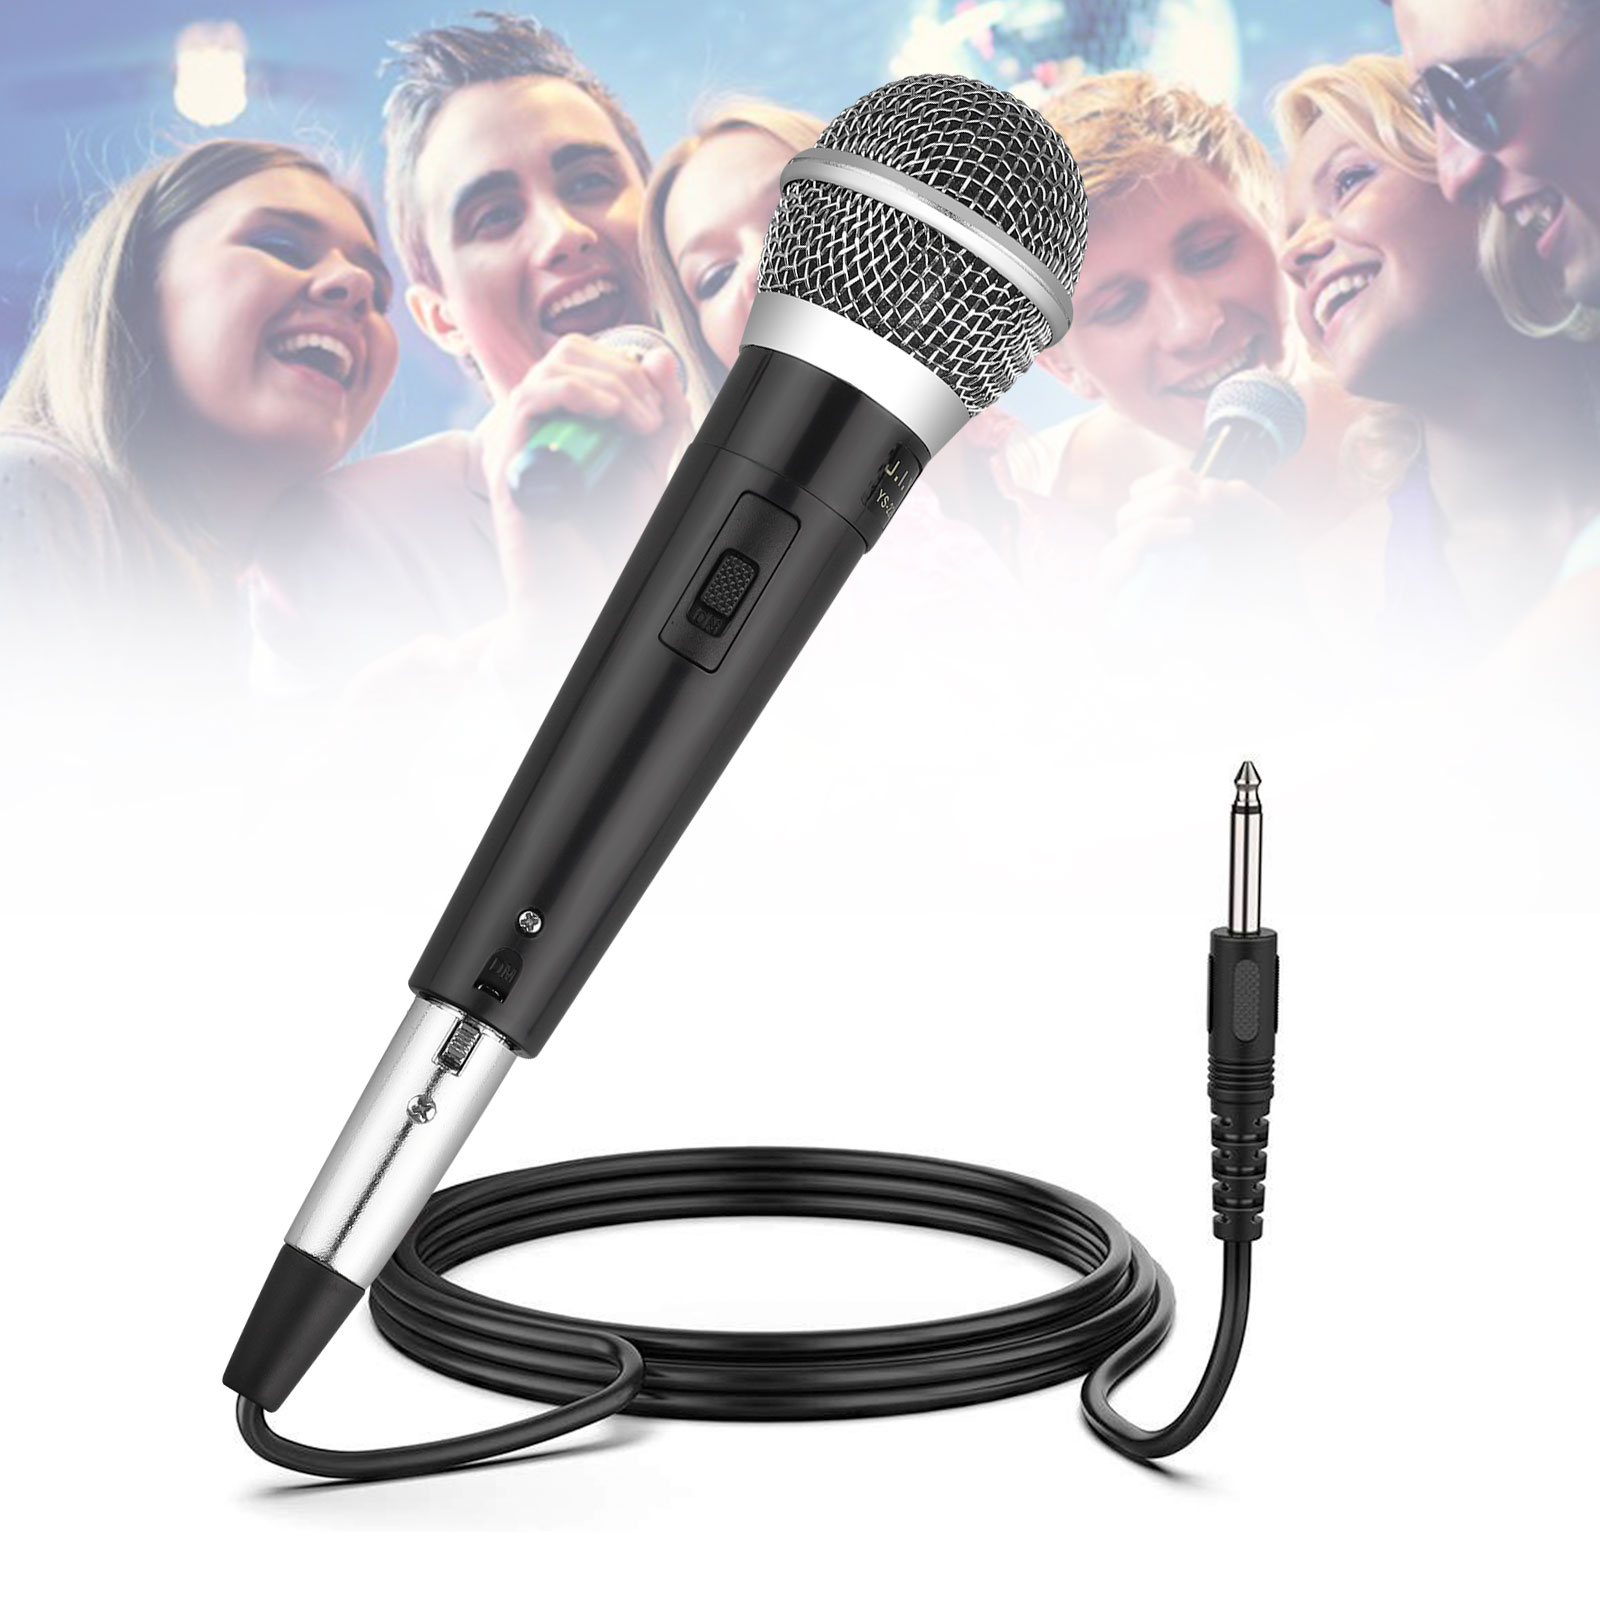 TSV Wired Dynamic Microphone, Professional Handheld Cardioid Microphone, Portable Dynamic Mic With 6.35mm 10 ft XLR Cable for Karaoke Machine/Speaker/Amp/Mixer for Karaoke Singing, Speech, Wedding - image 1 of 12